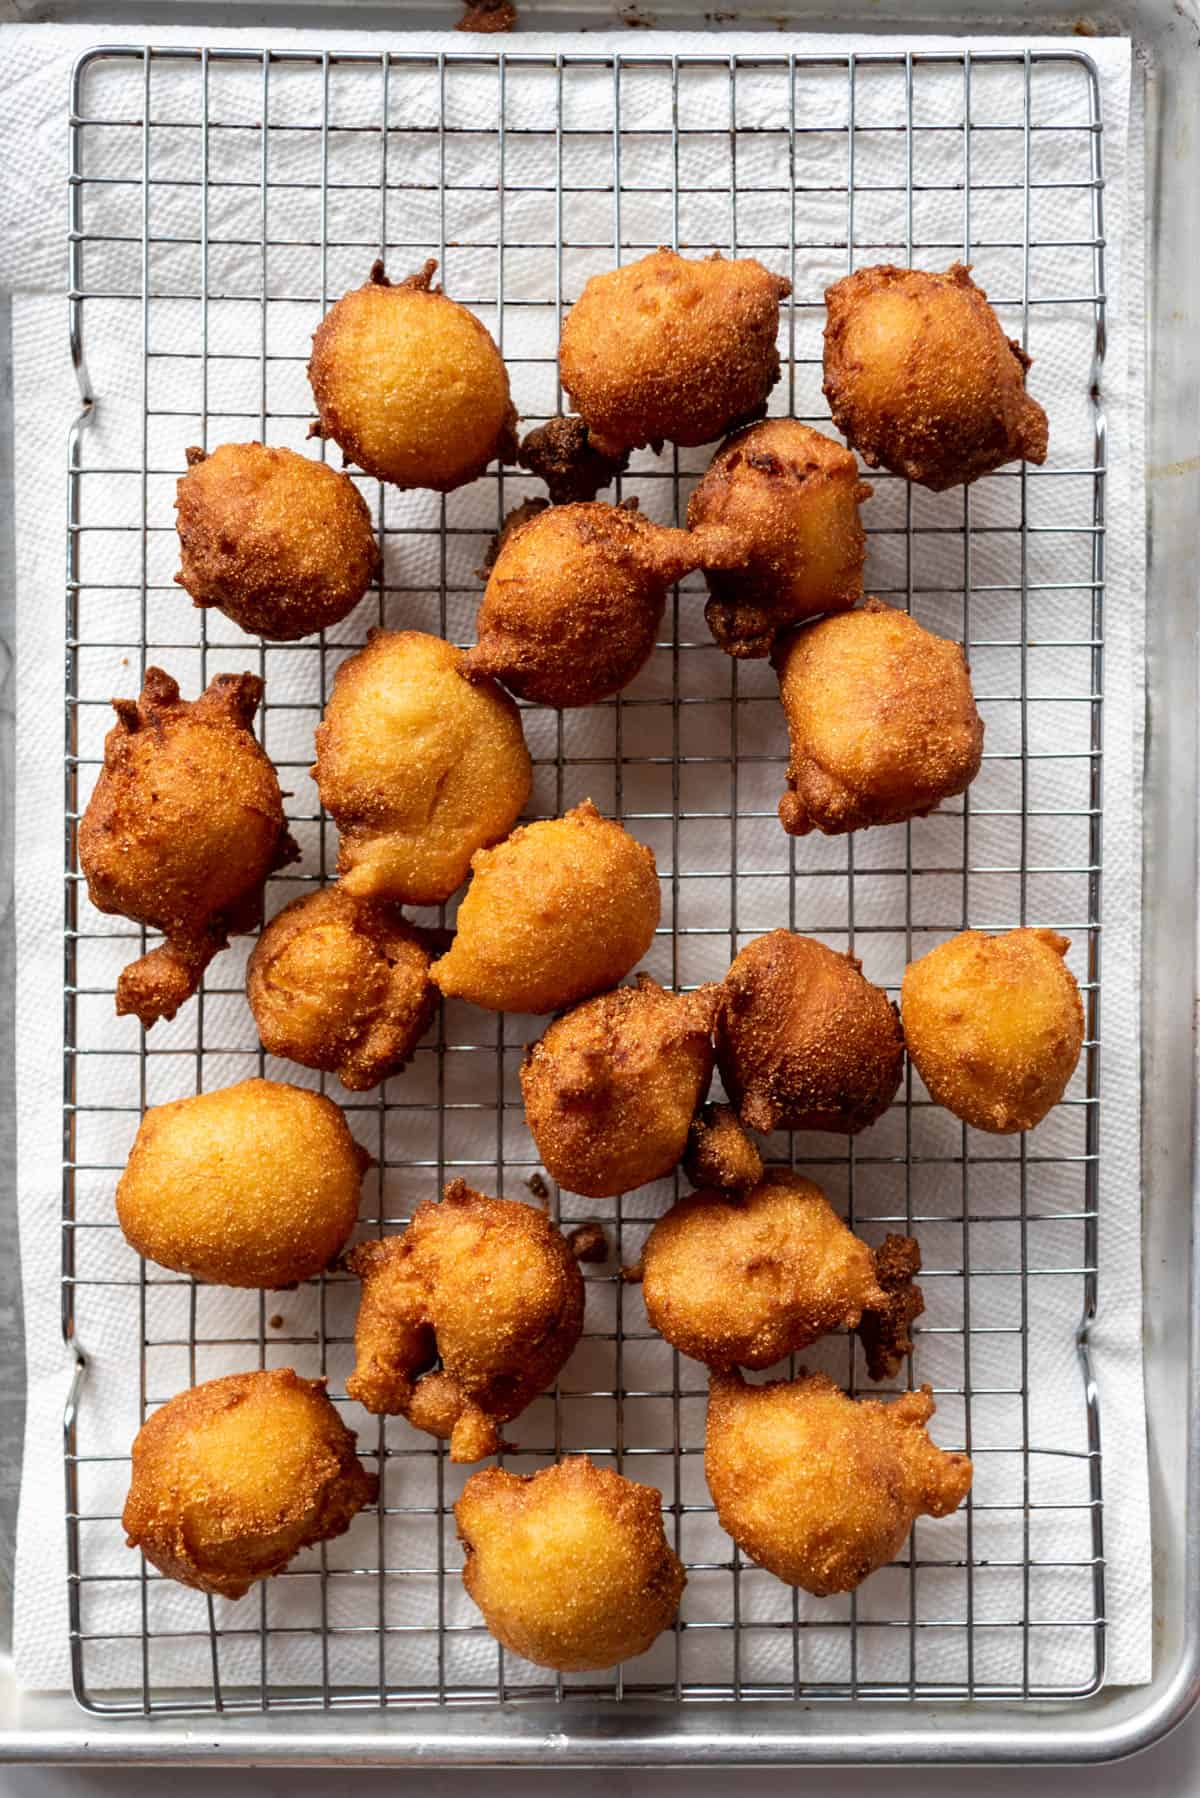 Freshly fried hush puppies draining on a wire rack over paper towels.